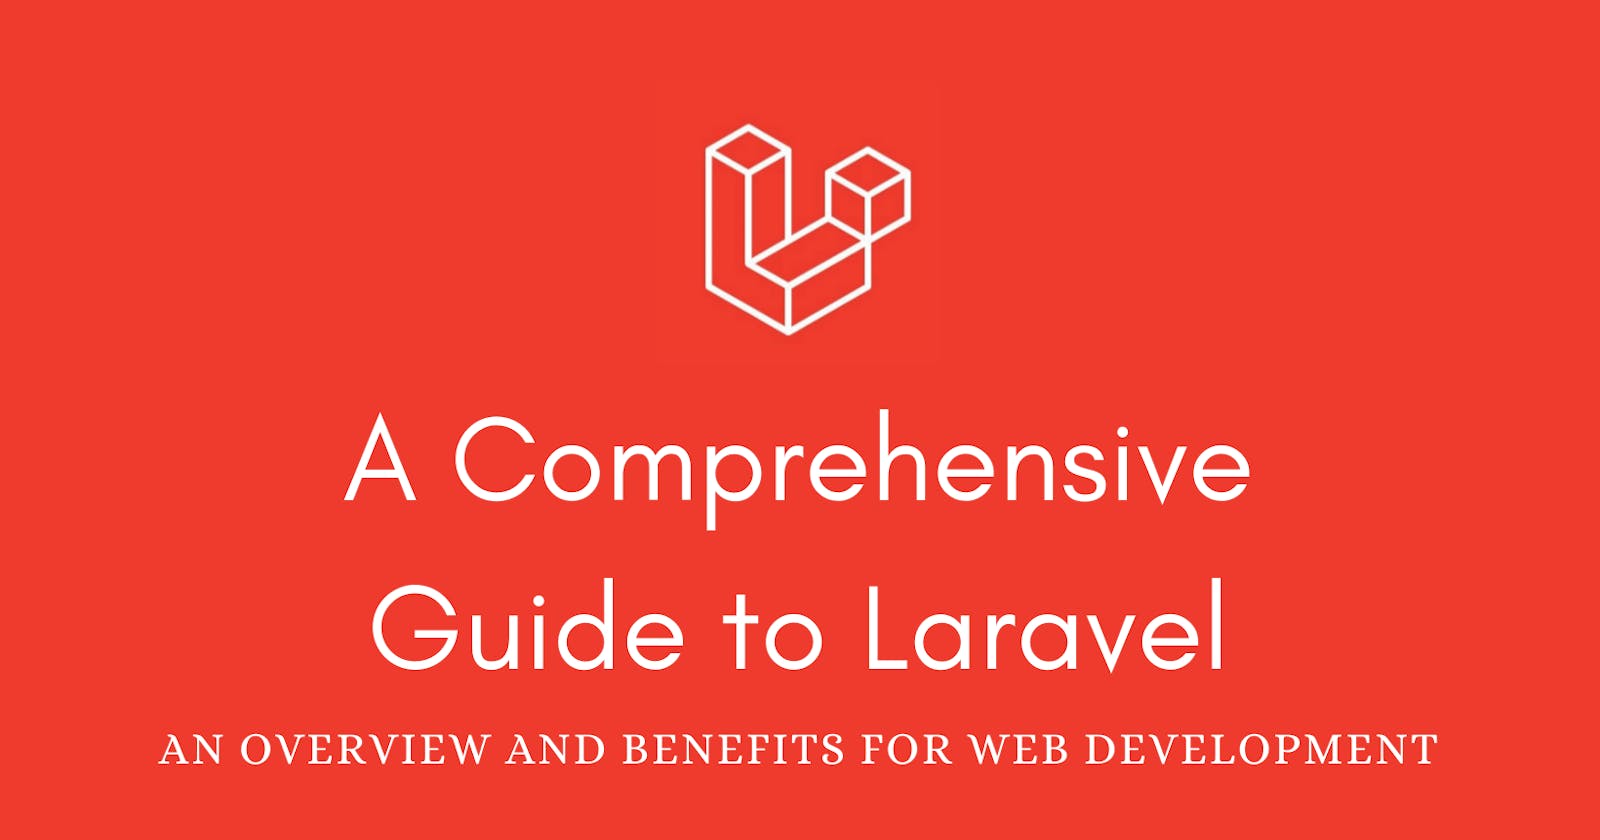 A Comprehensive Guide to Laravel: An Overview and Benefits for Web Development